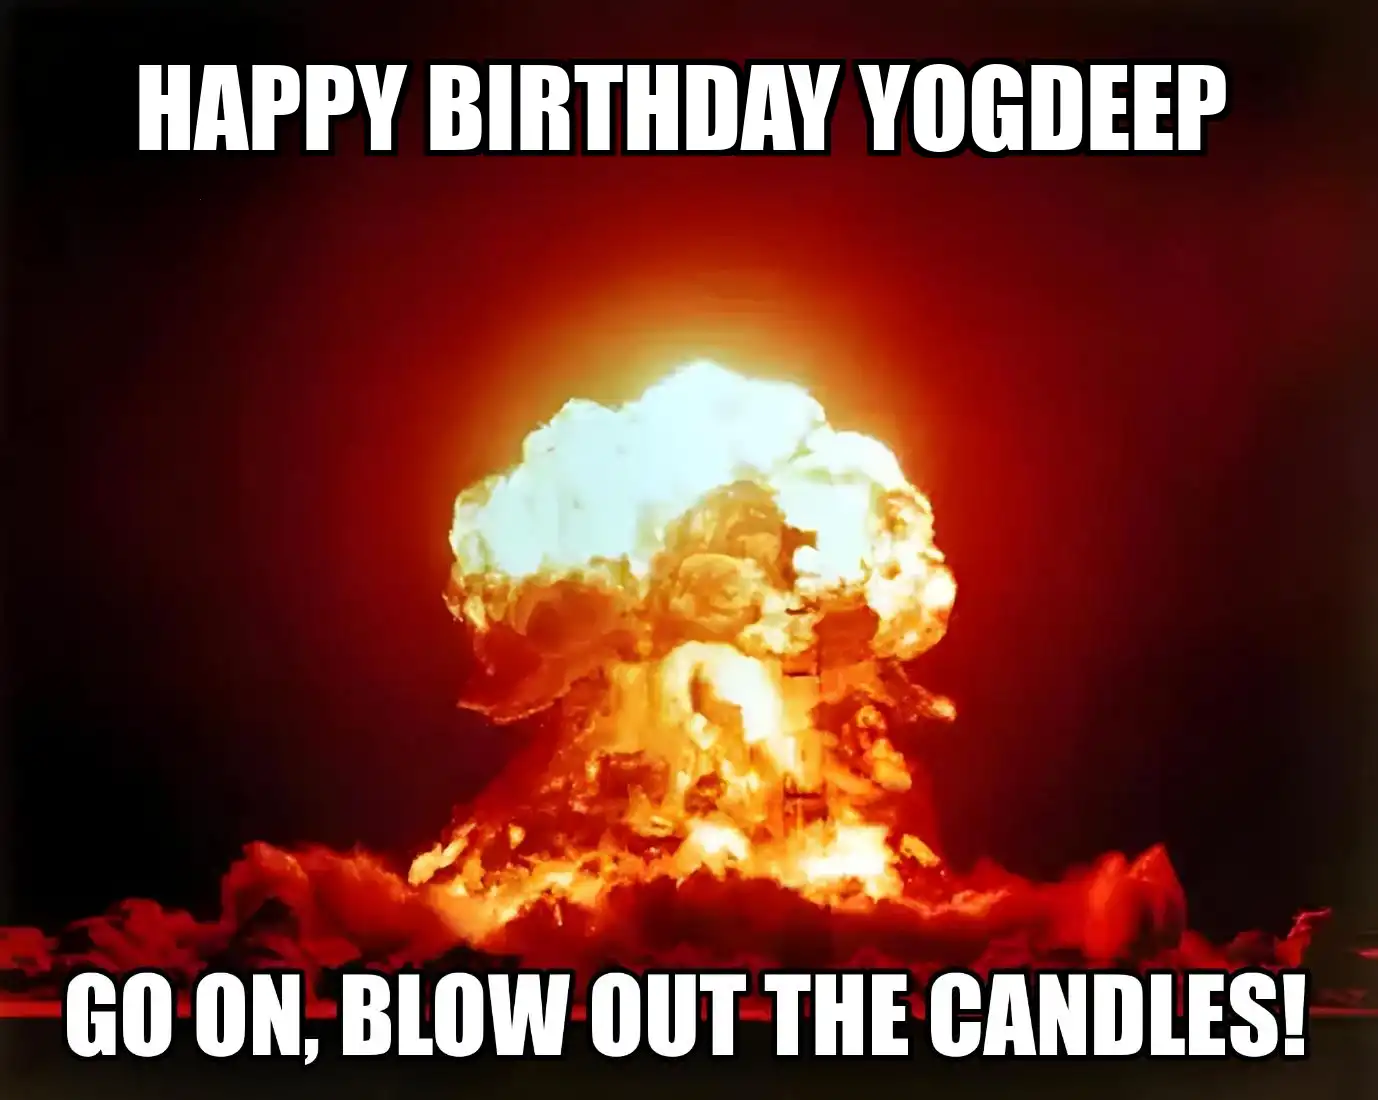 Happy Birthday Yogdeep Go On Blow Out The Candles Meme